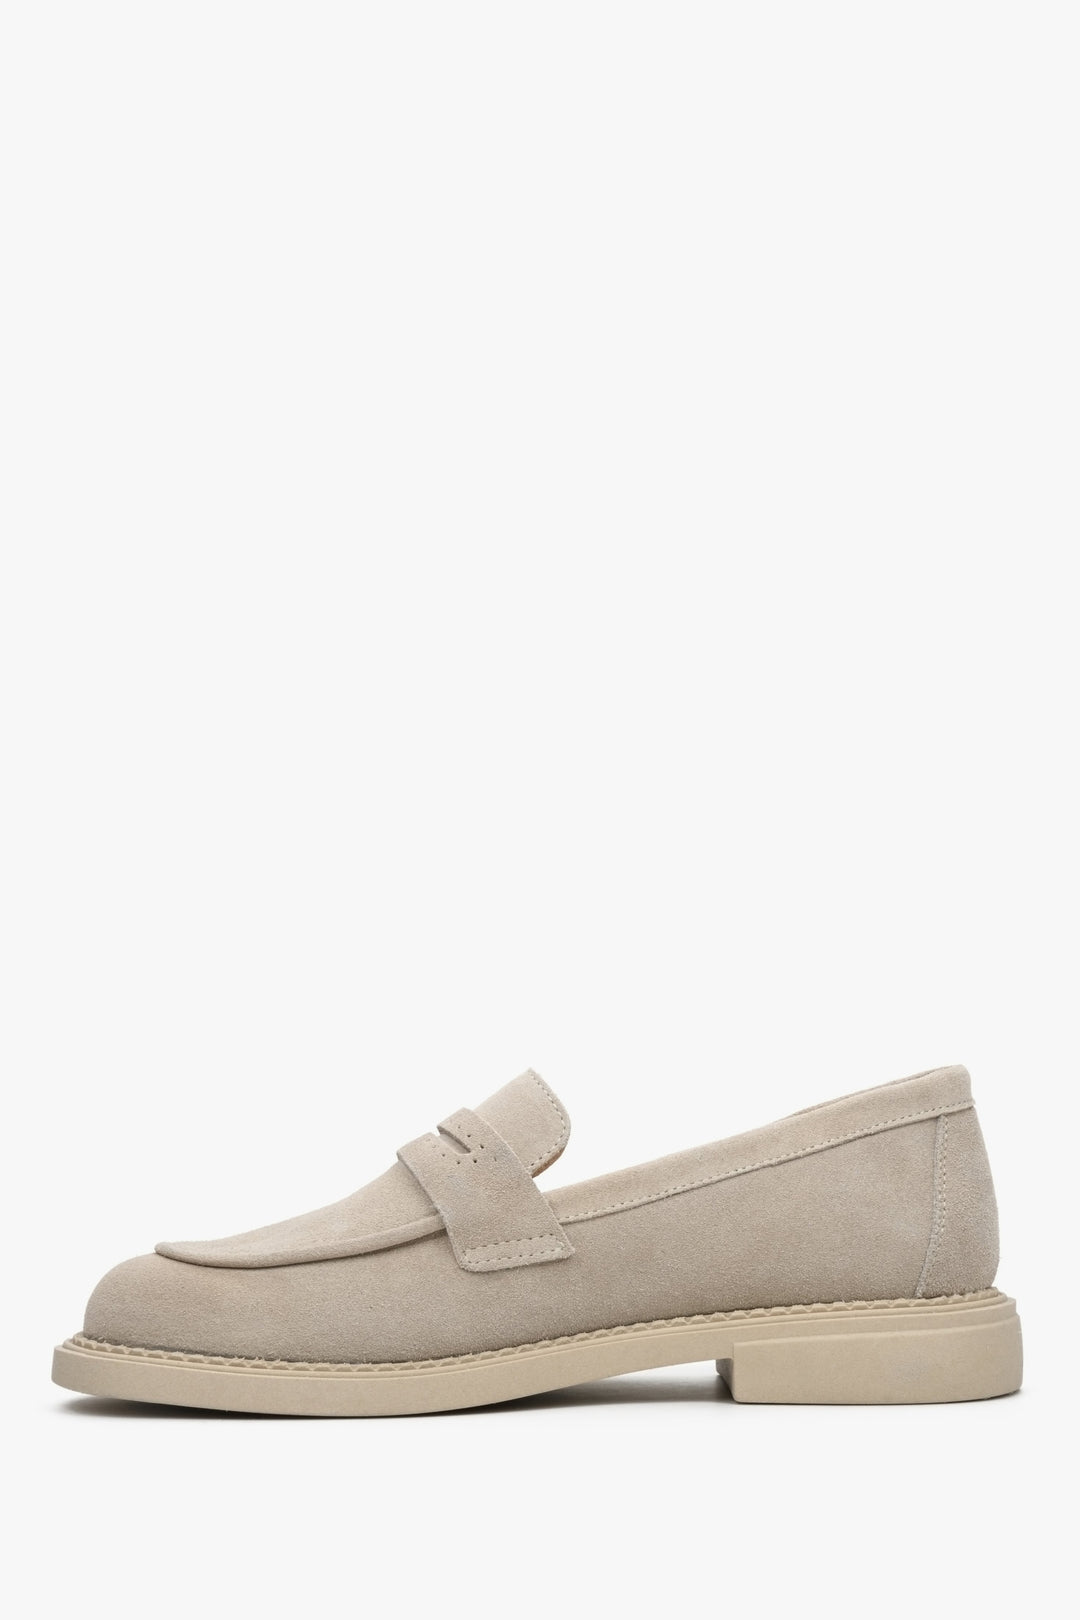 Women's suede loafers in sand beige color by Estro - shoe profile.